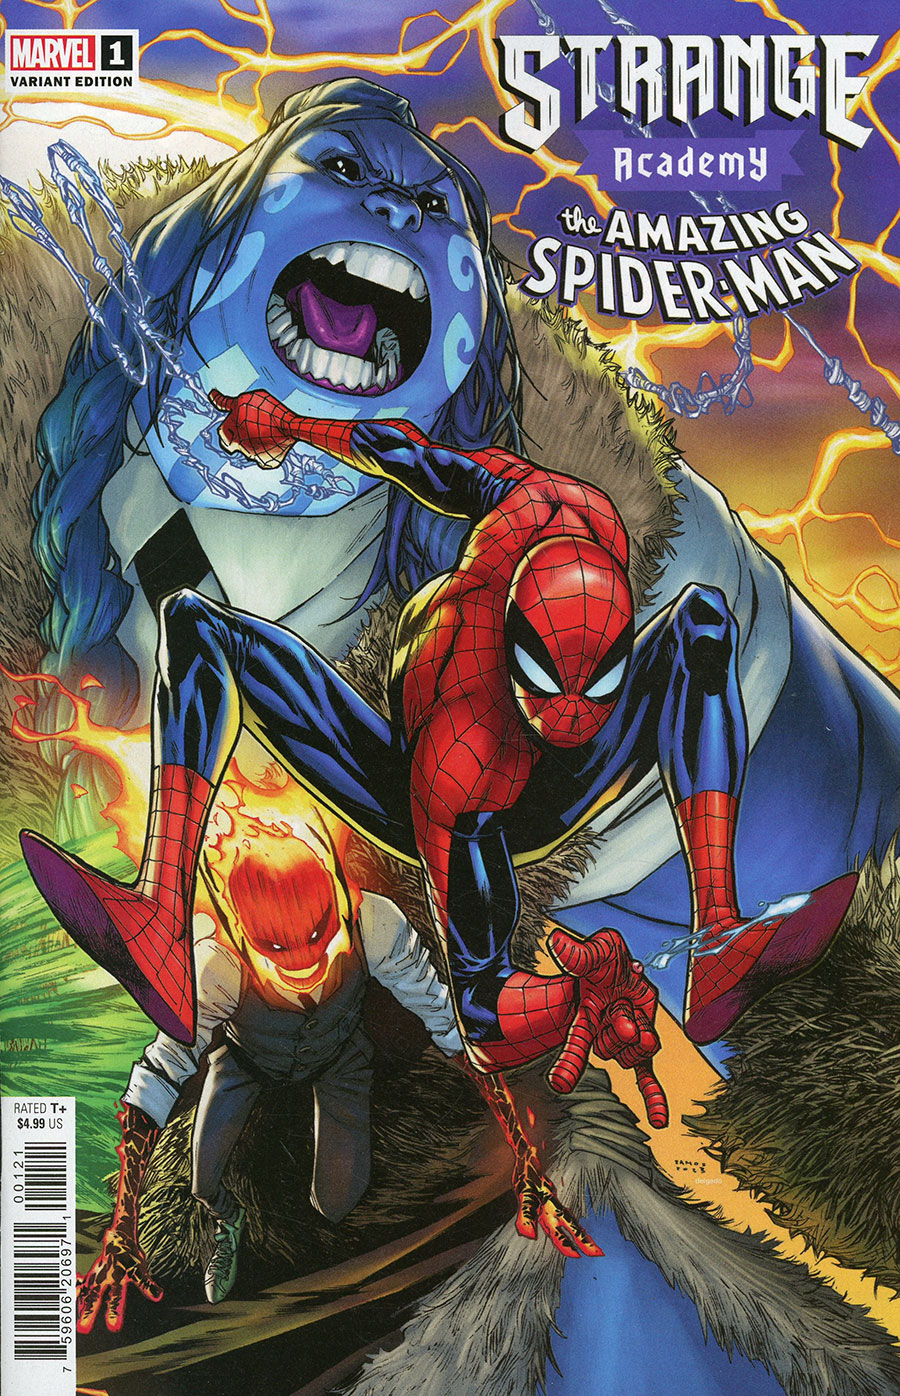 Strange Academy Amazing Spider-Man #1 (One Shot) Cover B Variant Humberto Ramos Connecting Cover